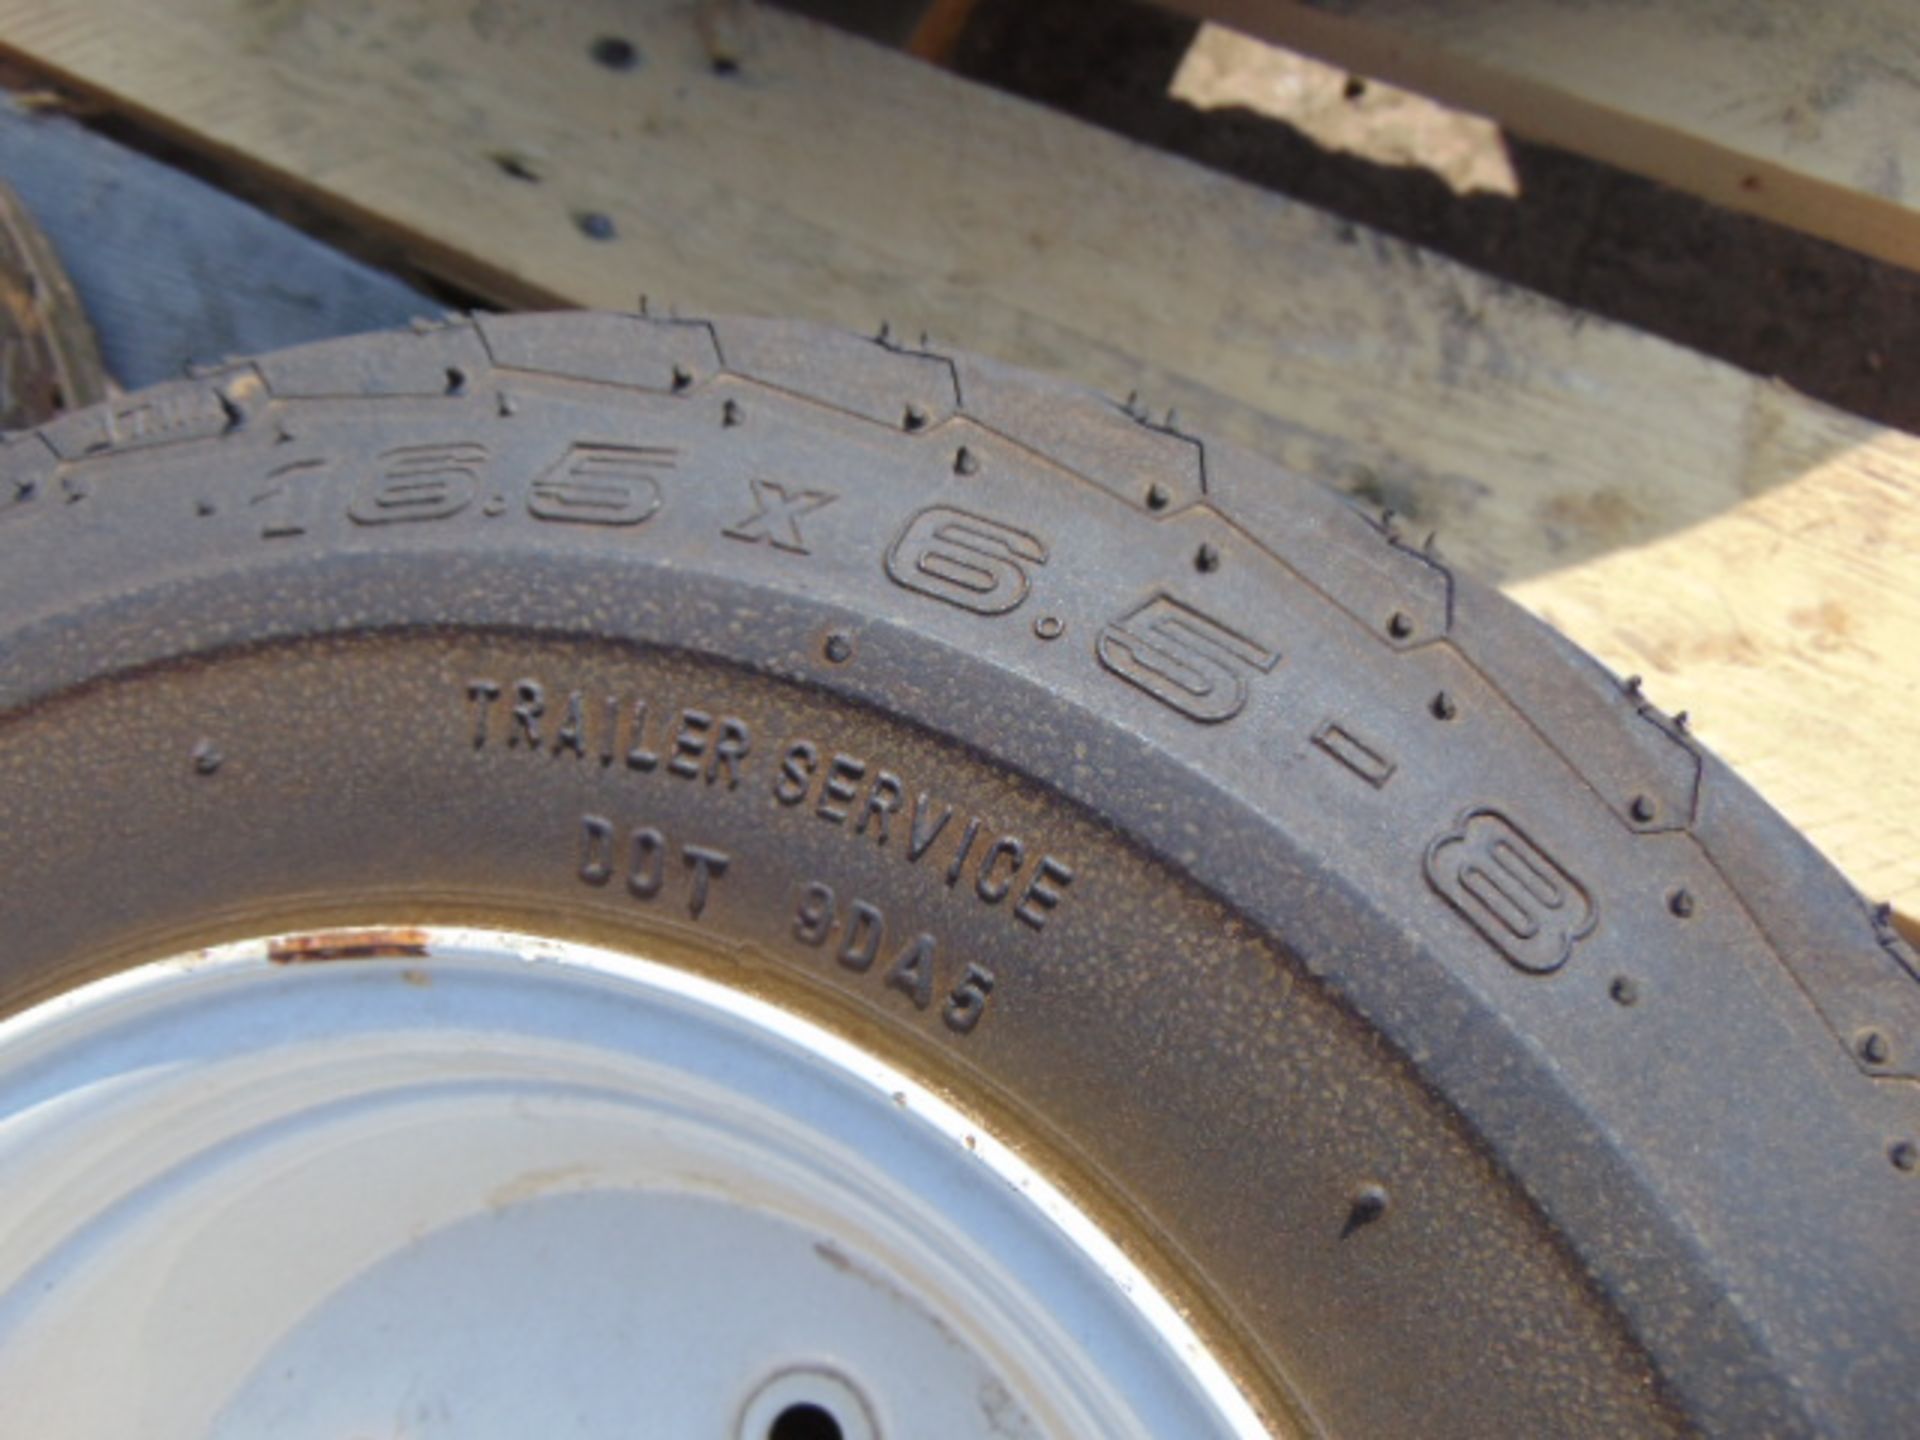 3 x Deli Tire 16.5x1.5-8 Tyres complete with 4 Stud Rims - Image 6 of 6